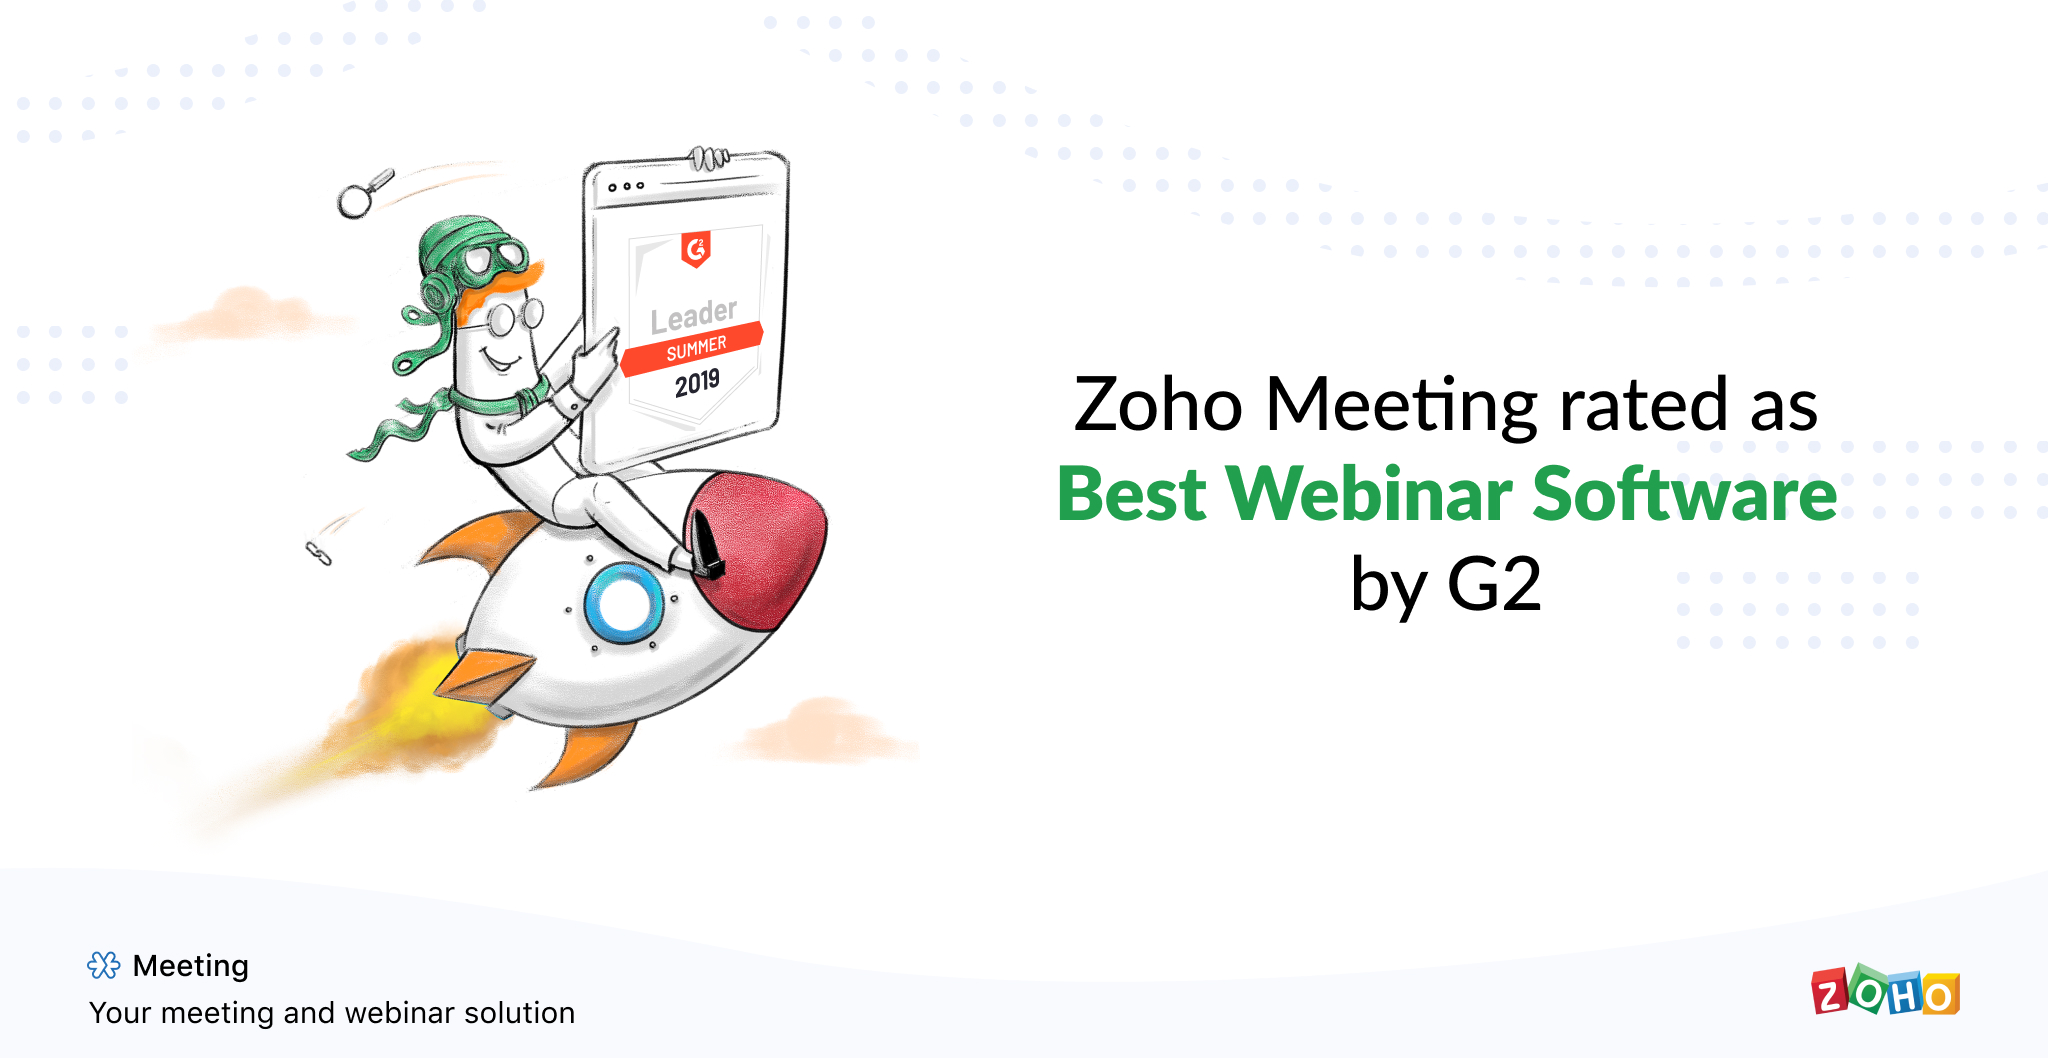 Zoho Meeting rated as Best Webinar Software by G2